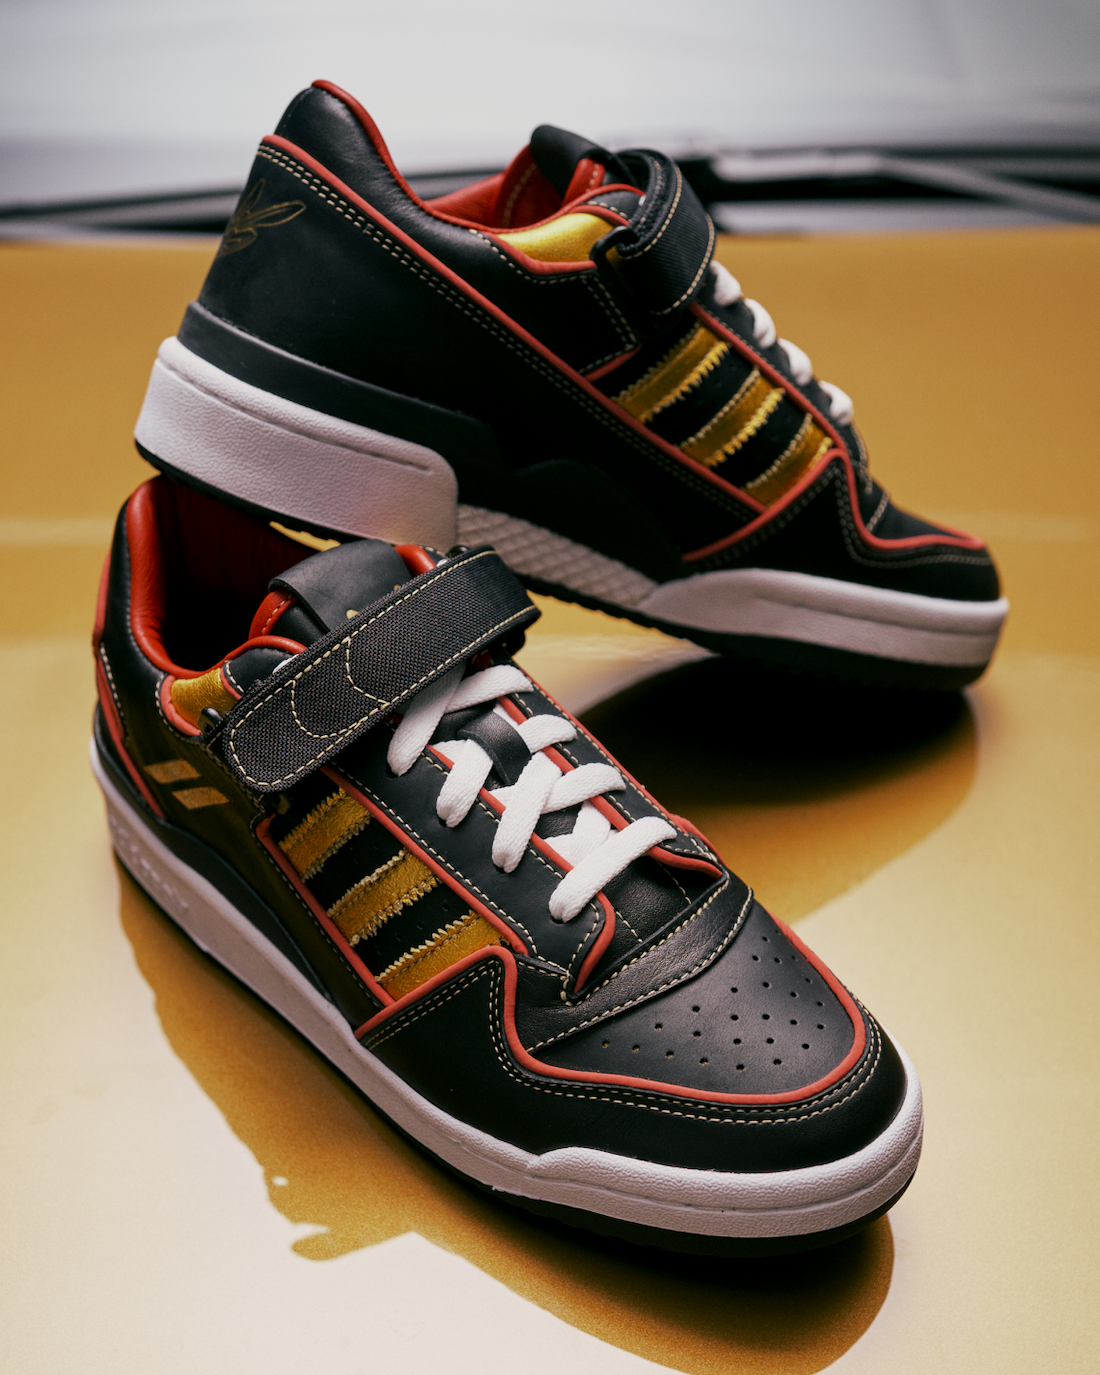 Tee Grizzley Dexter the Creator adidas Forum Low